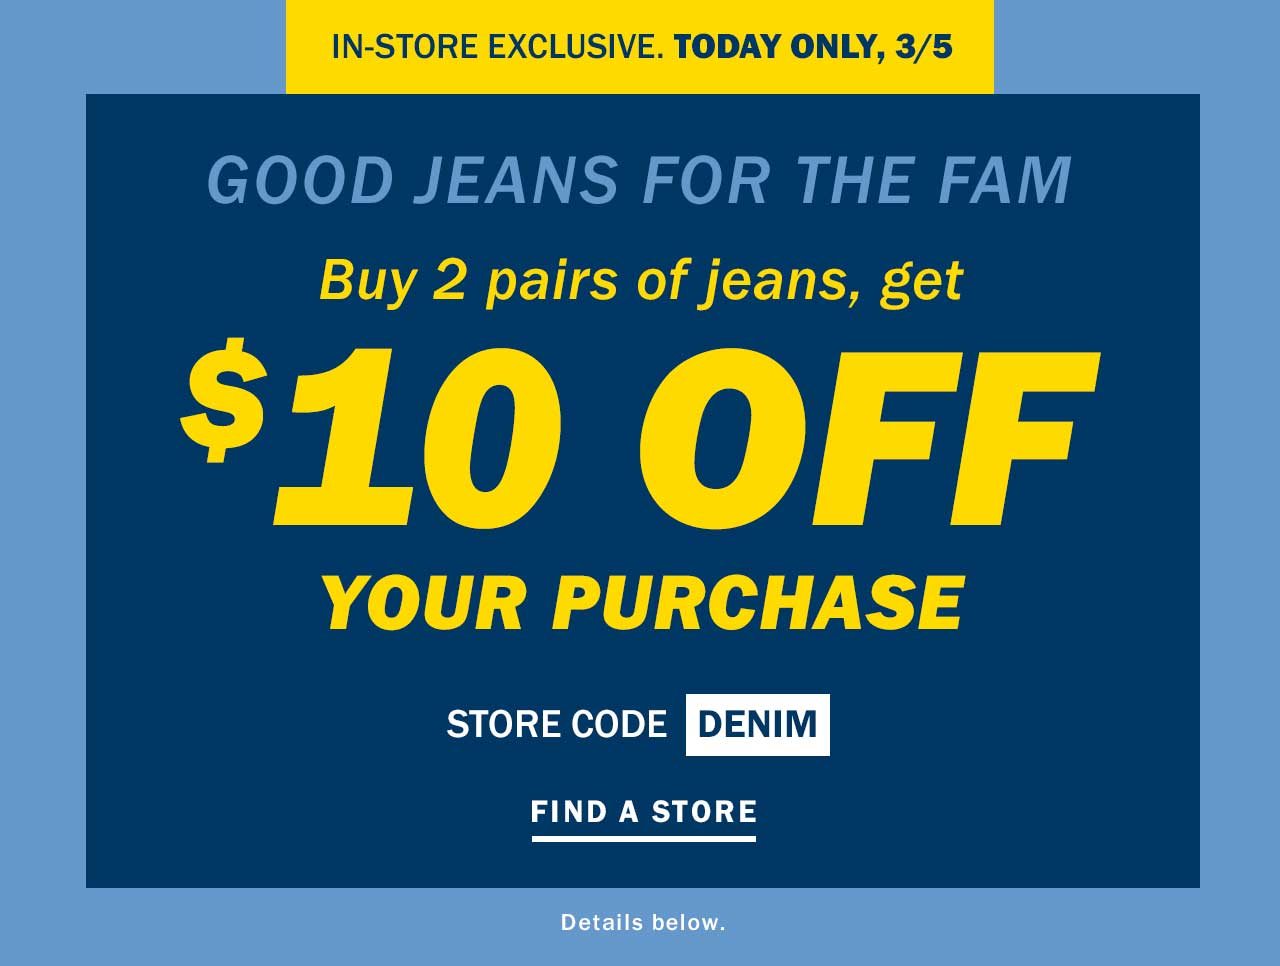 Good jeans for the fam